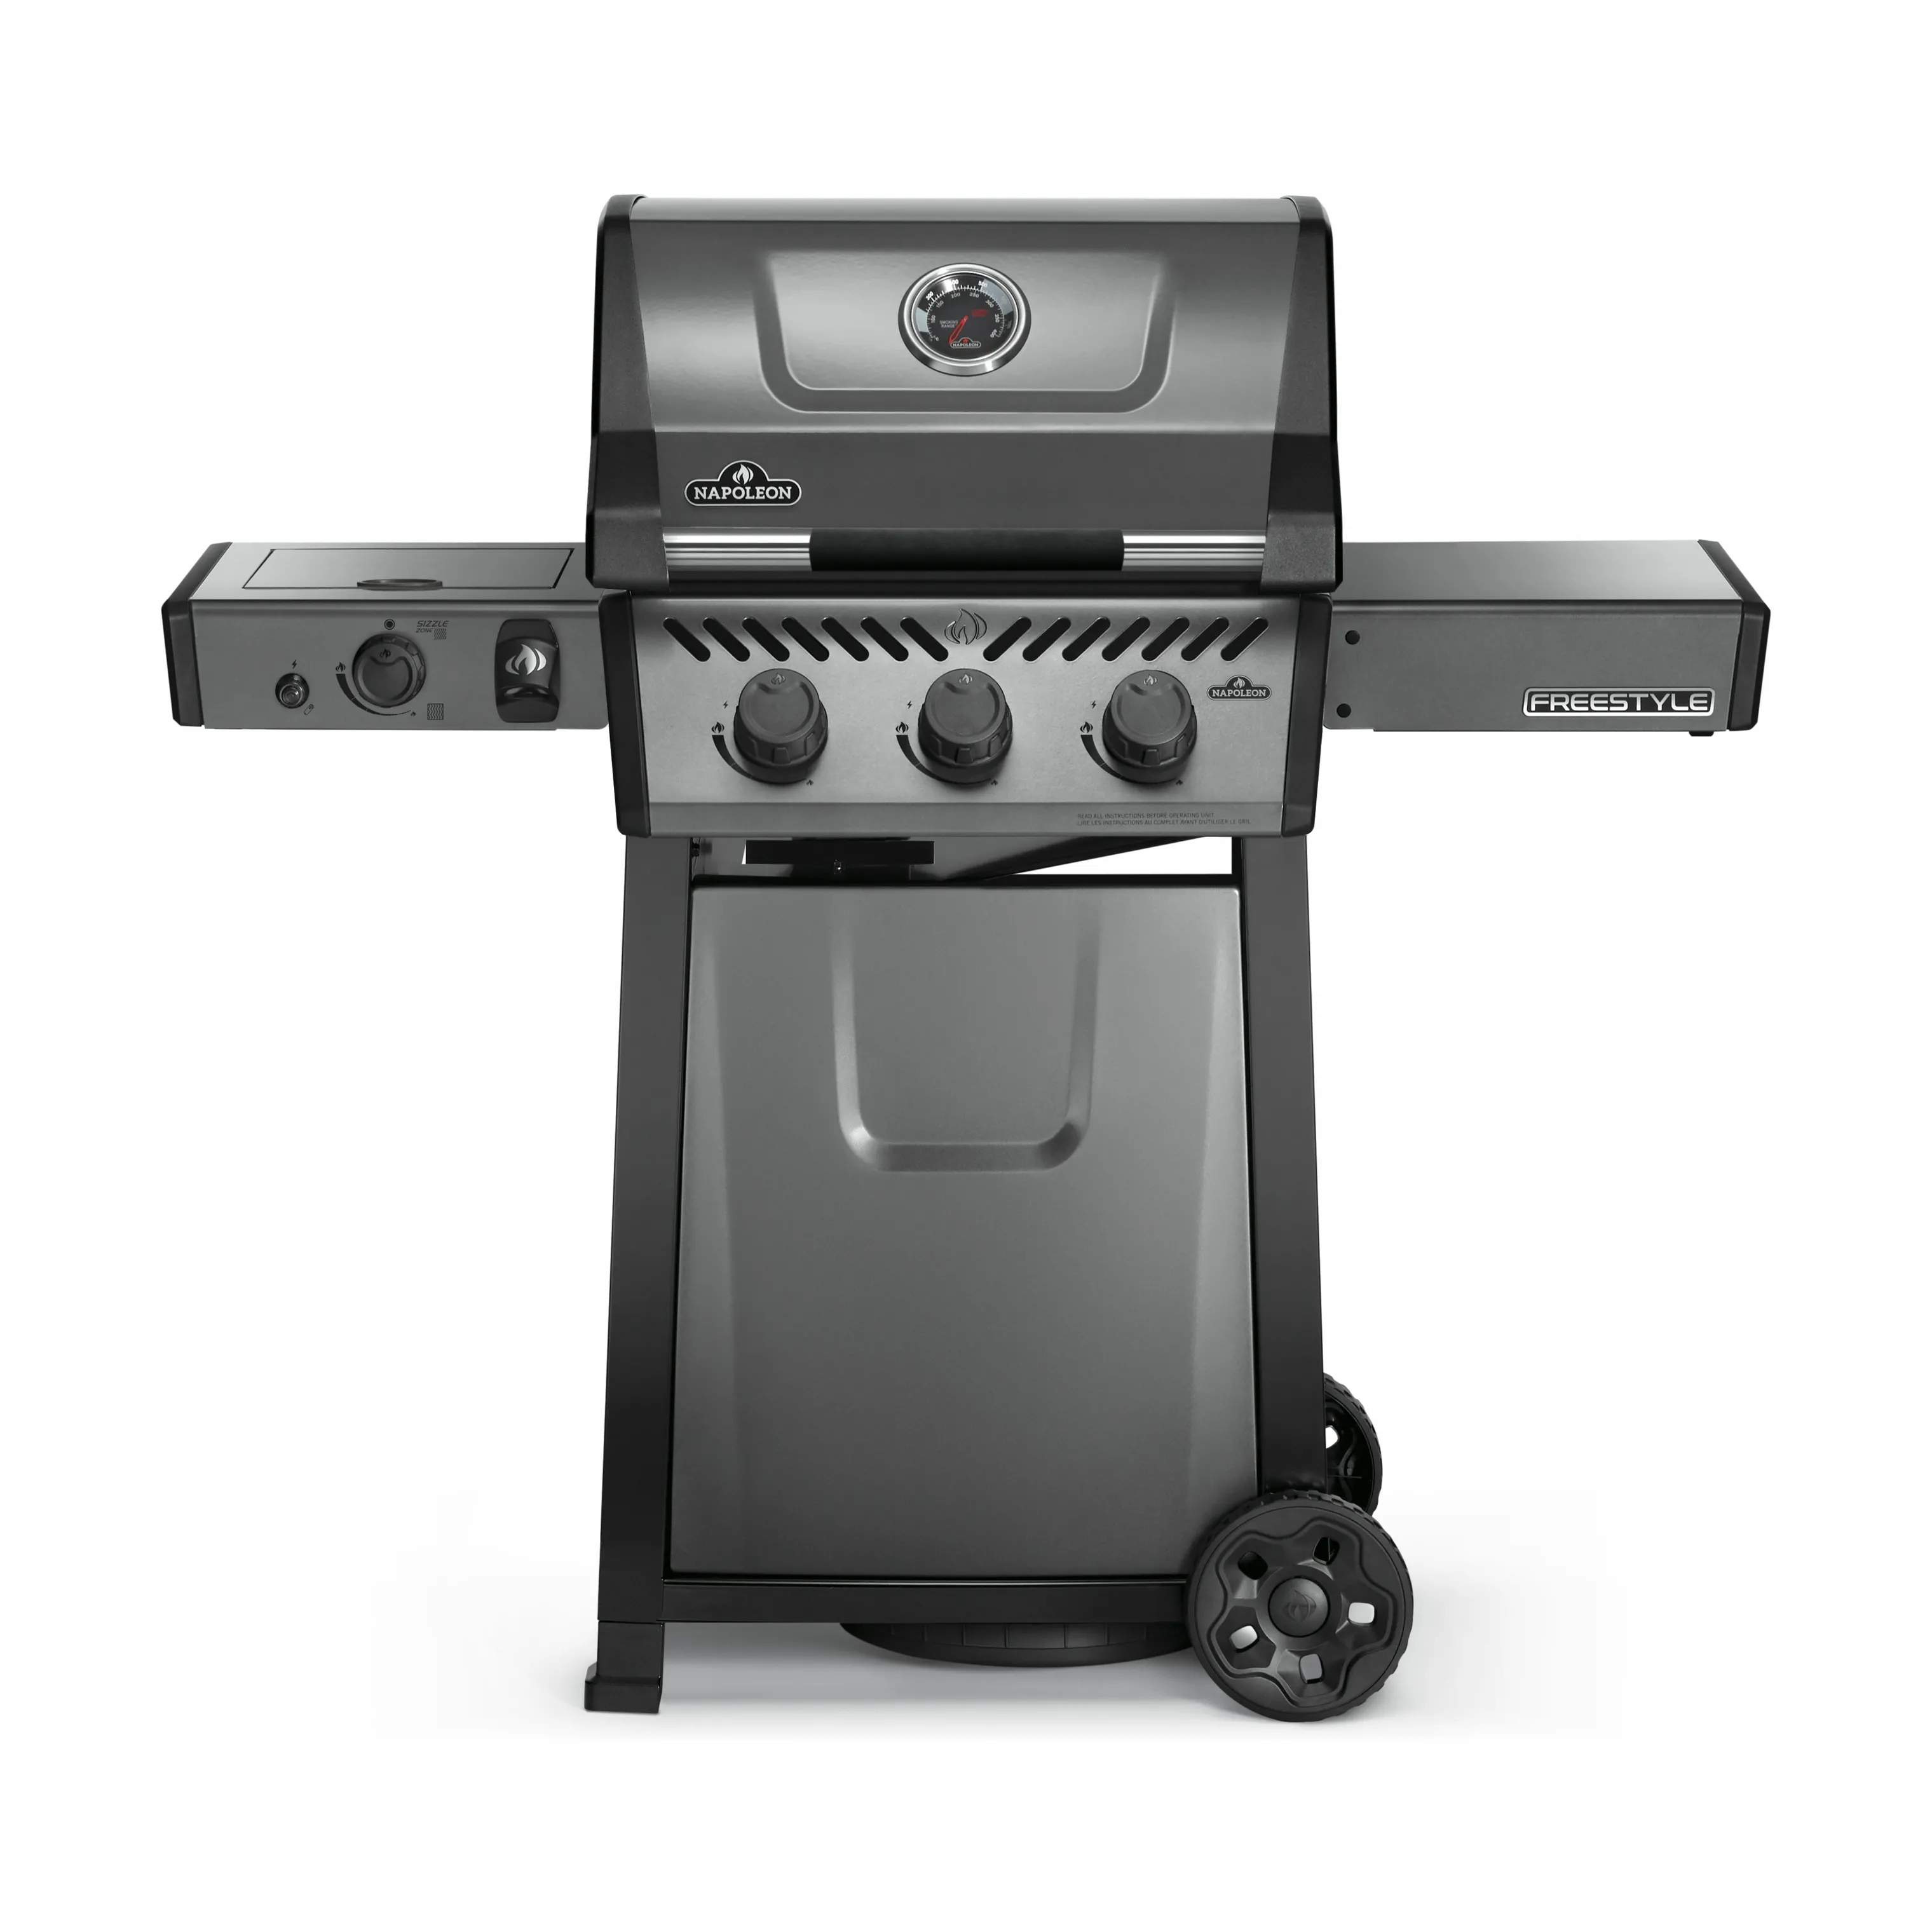 Freestyle 365 Grill m. Sizzle Zone